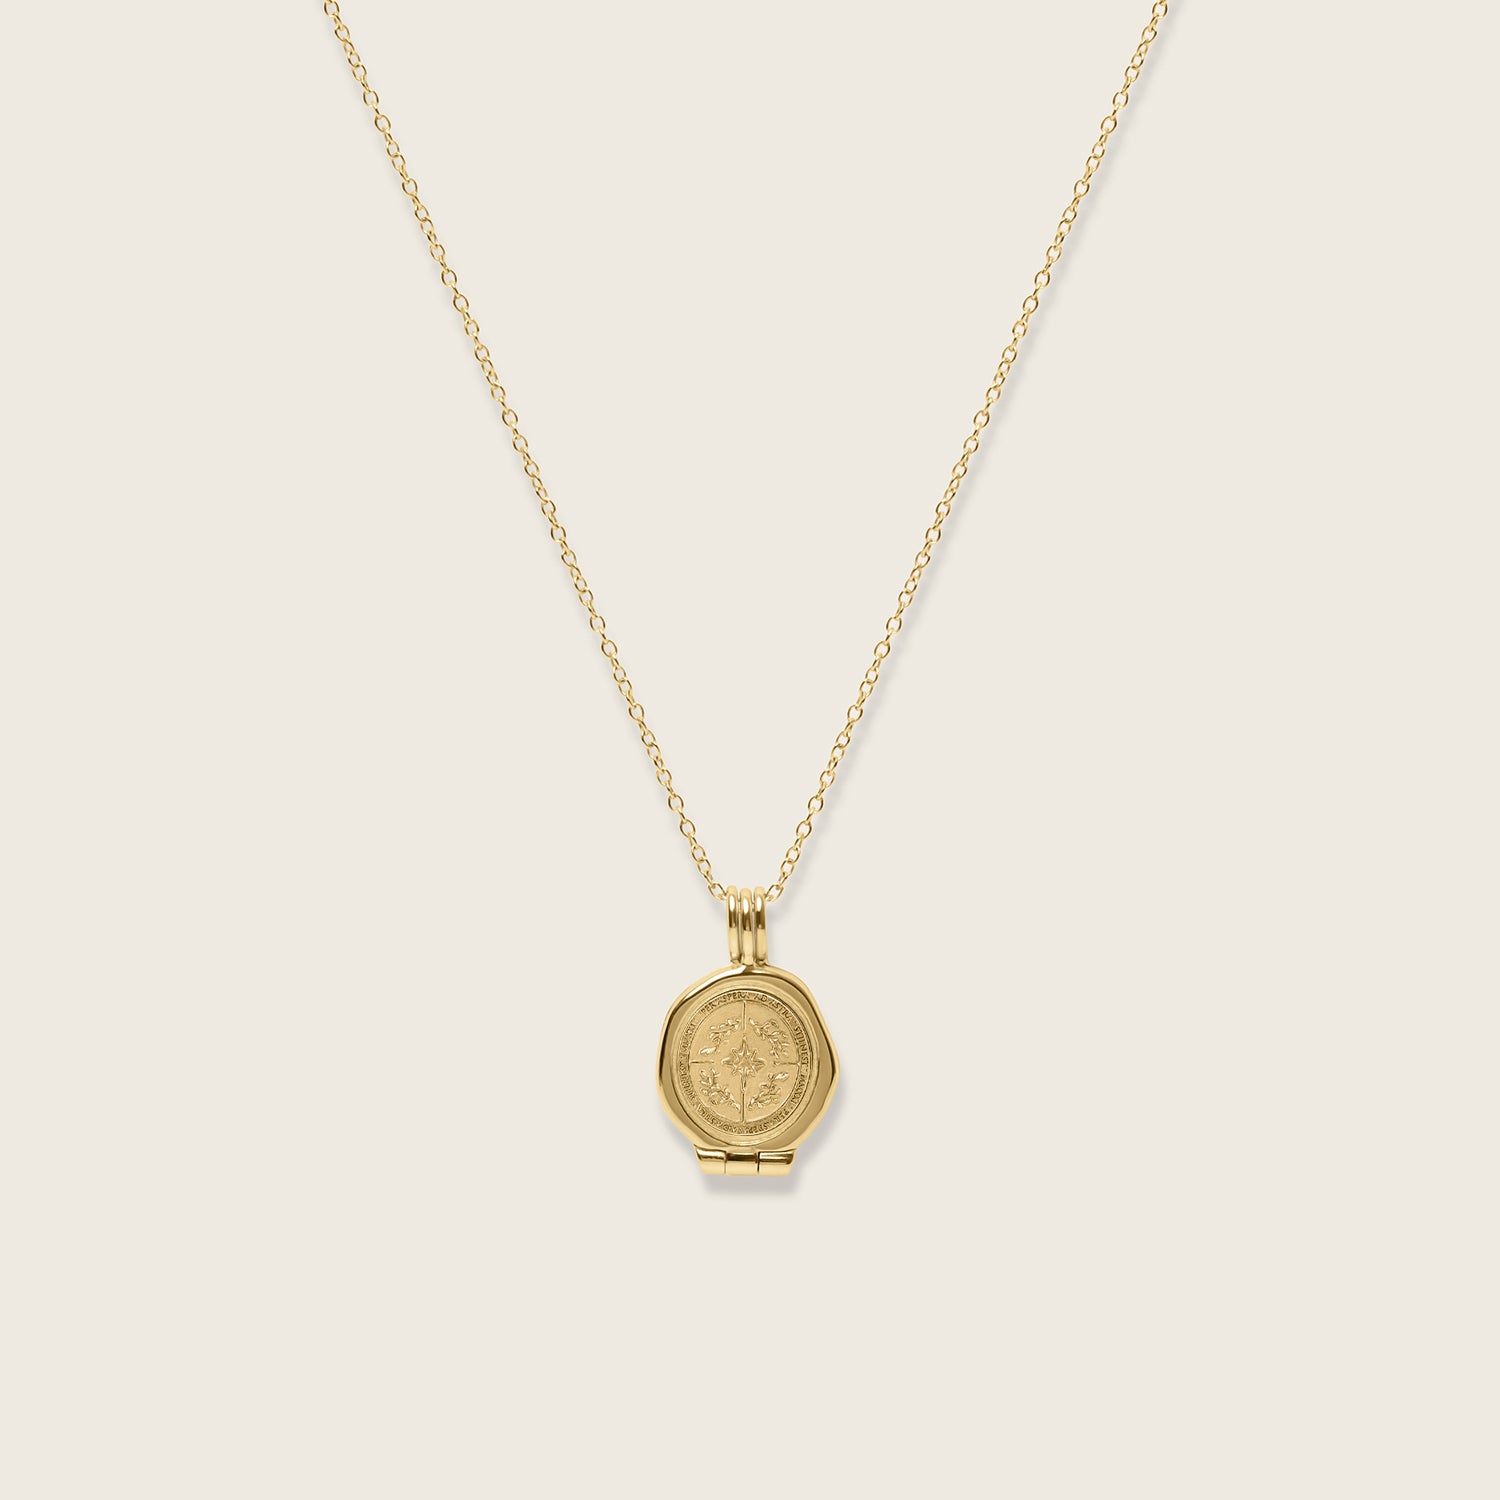 Ad Astra Seal Locket Necklace 14k Solid Gold